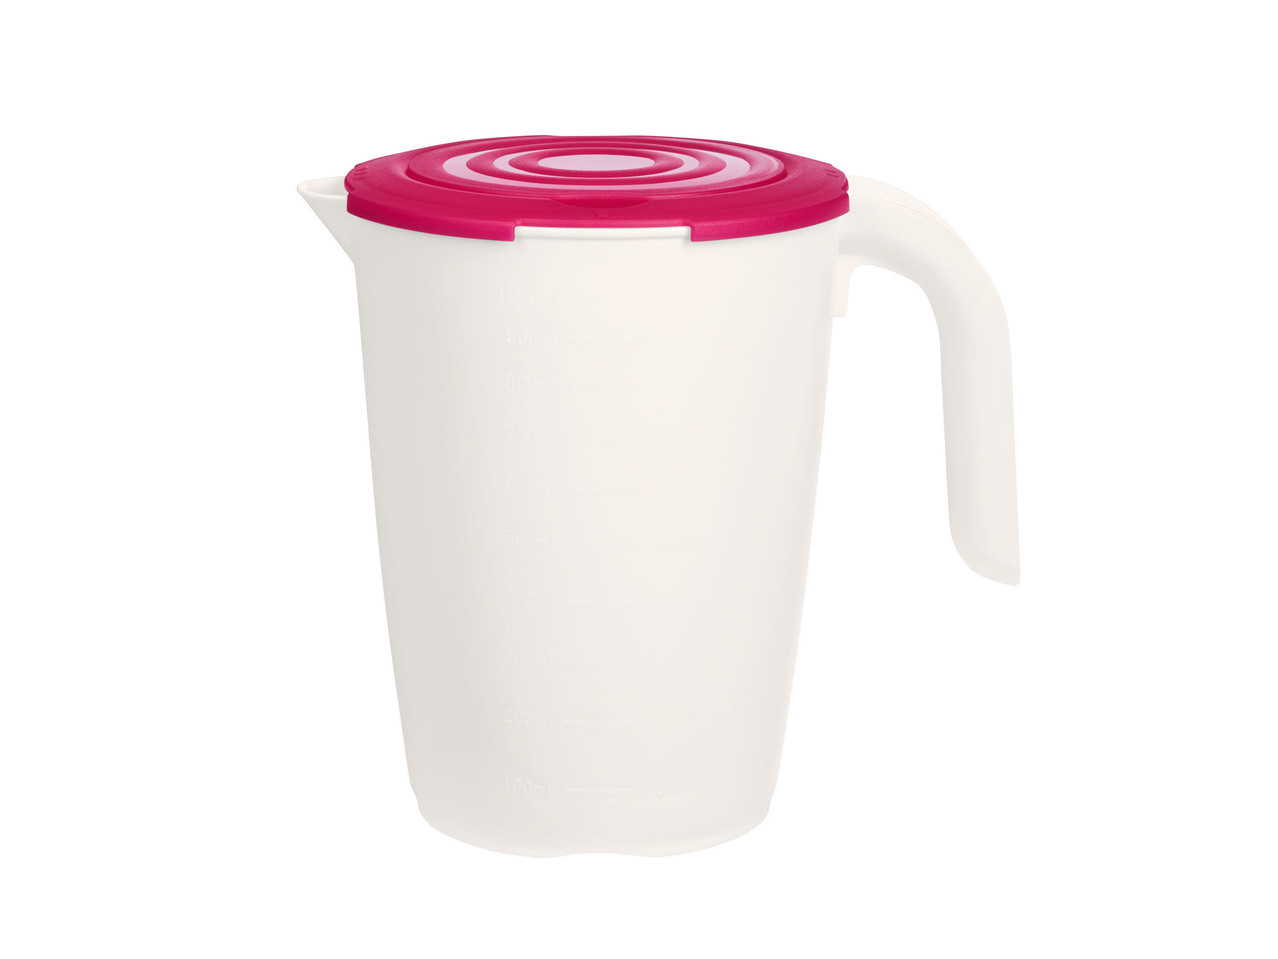 Storage Container, 1 or 2 pieces or Microwave Jug